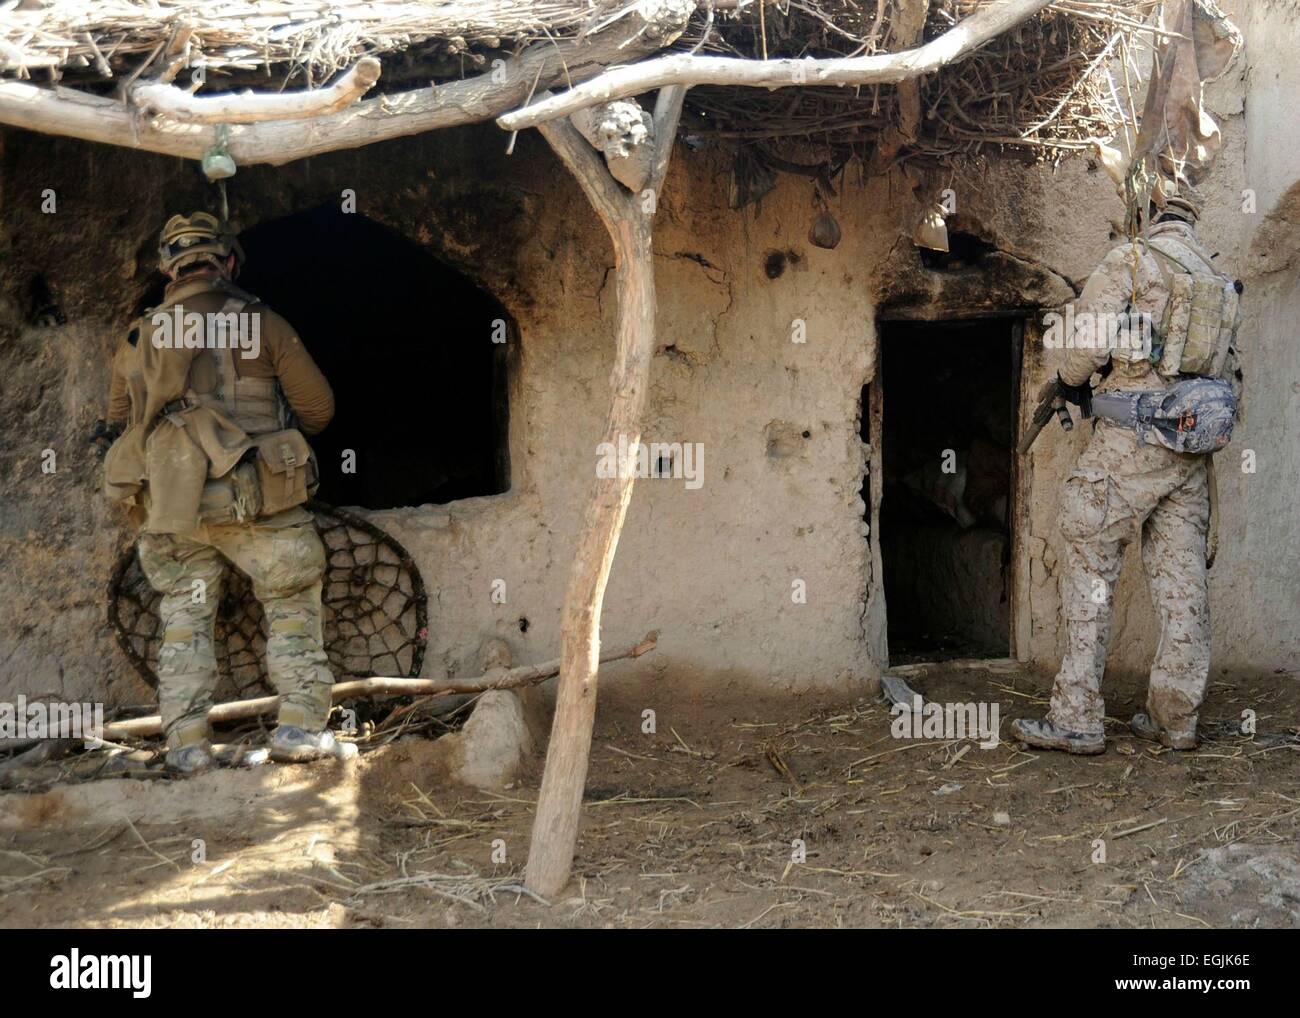 US Special Operation commandos check a compound during a security patrol February 6, 2013 in Doan-e Ulya Village, Shahid-e Hasas district, Uruzgan province, Afghanistan. Stock Photo